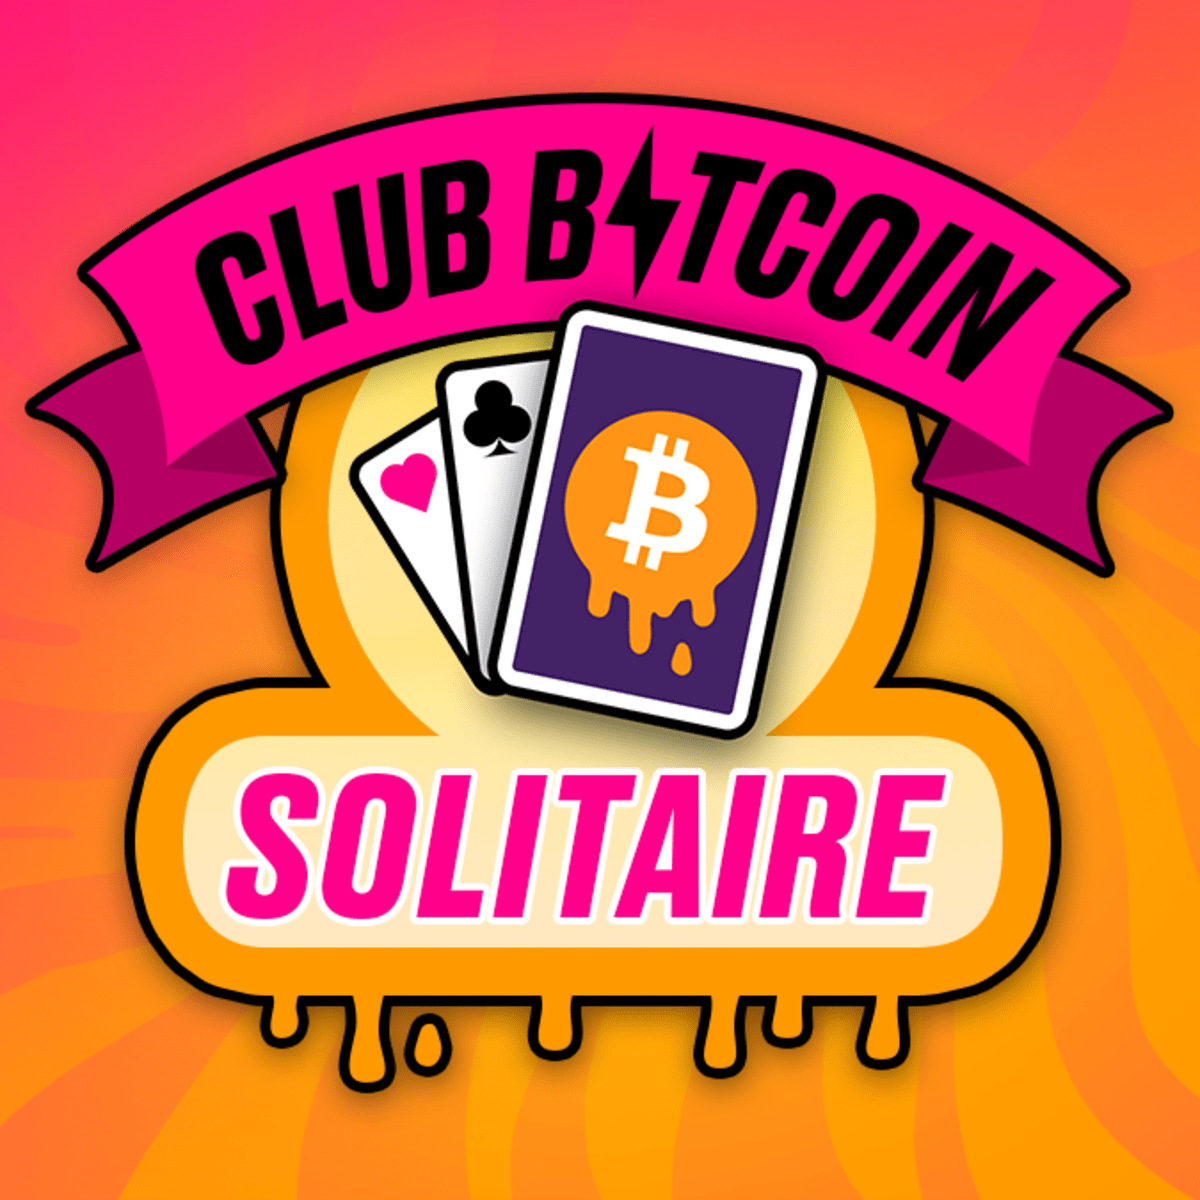 Bitcoin Solitaire - Get BTC Free Mobile Game Download - 51wma